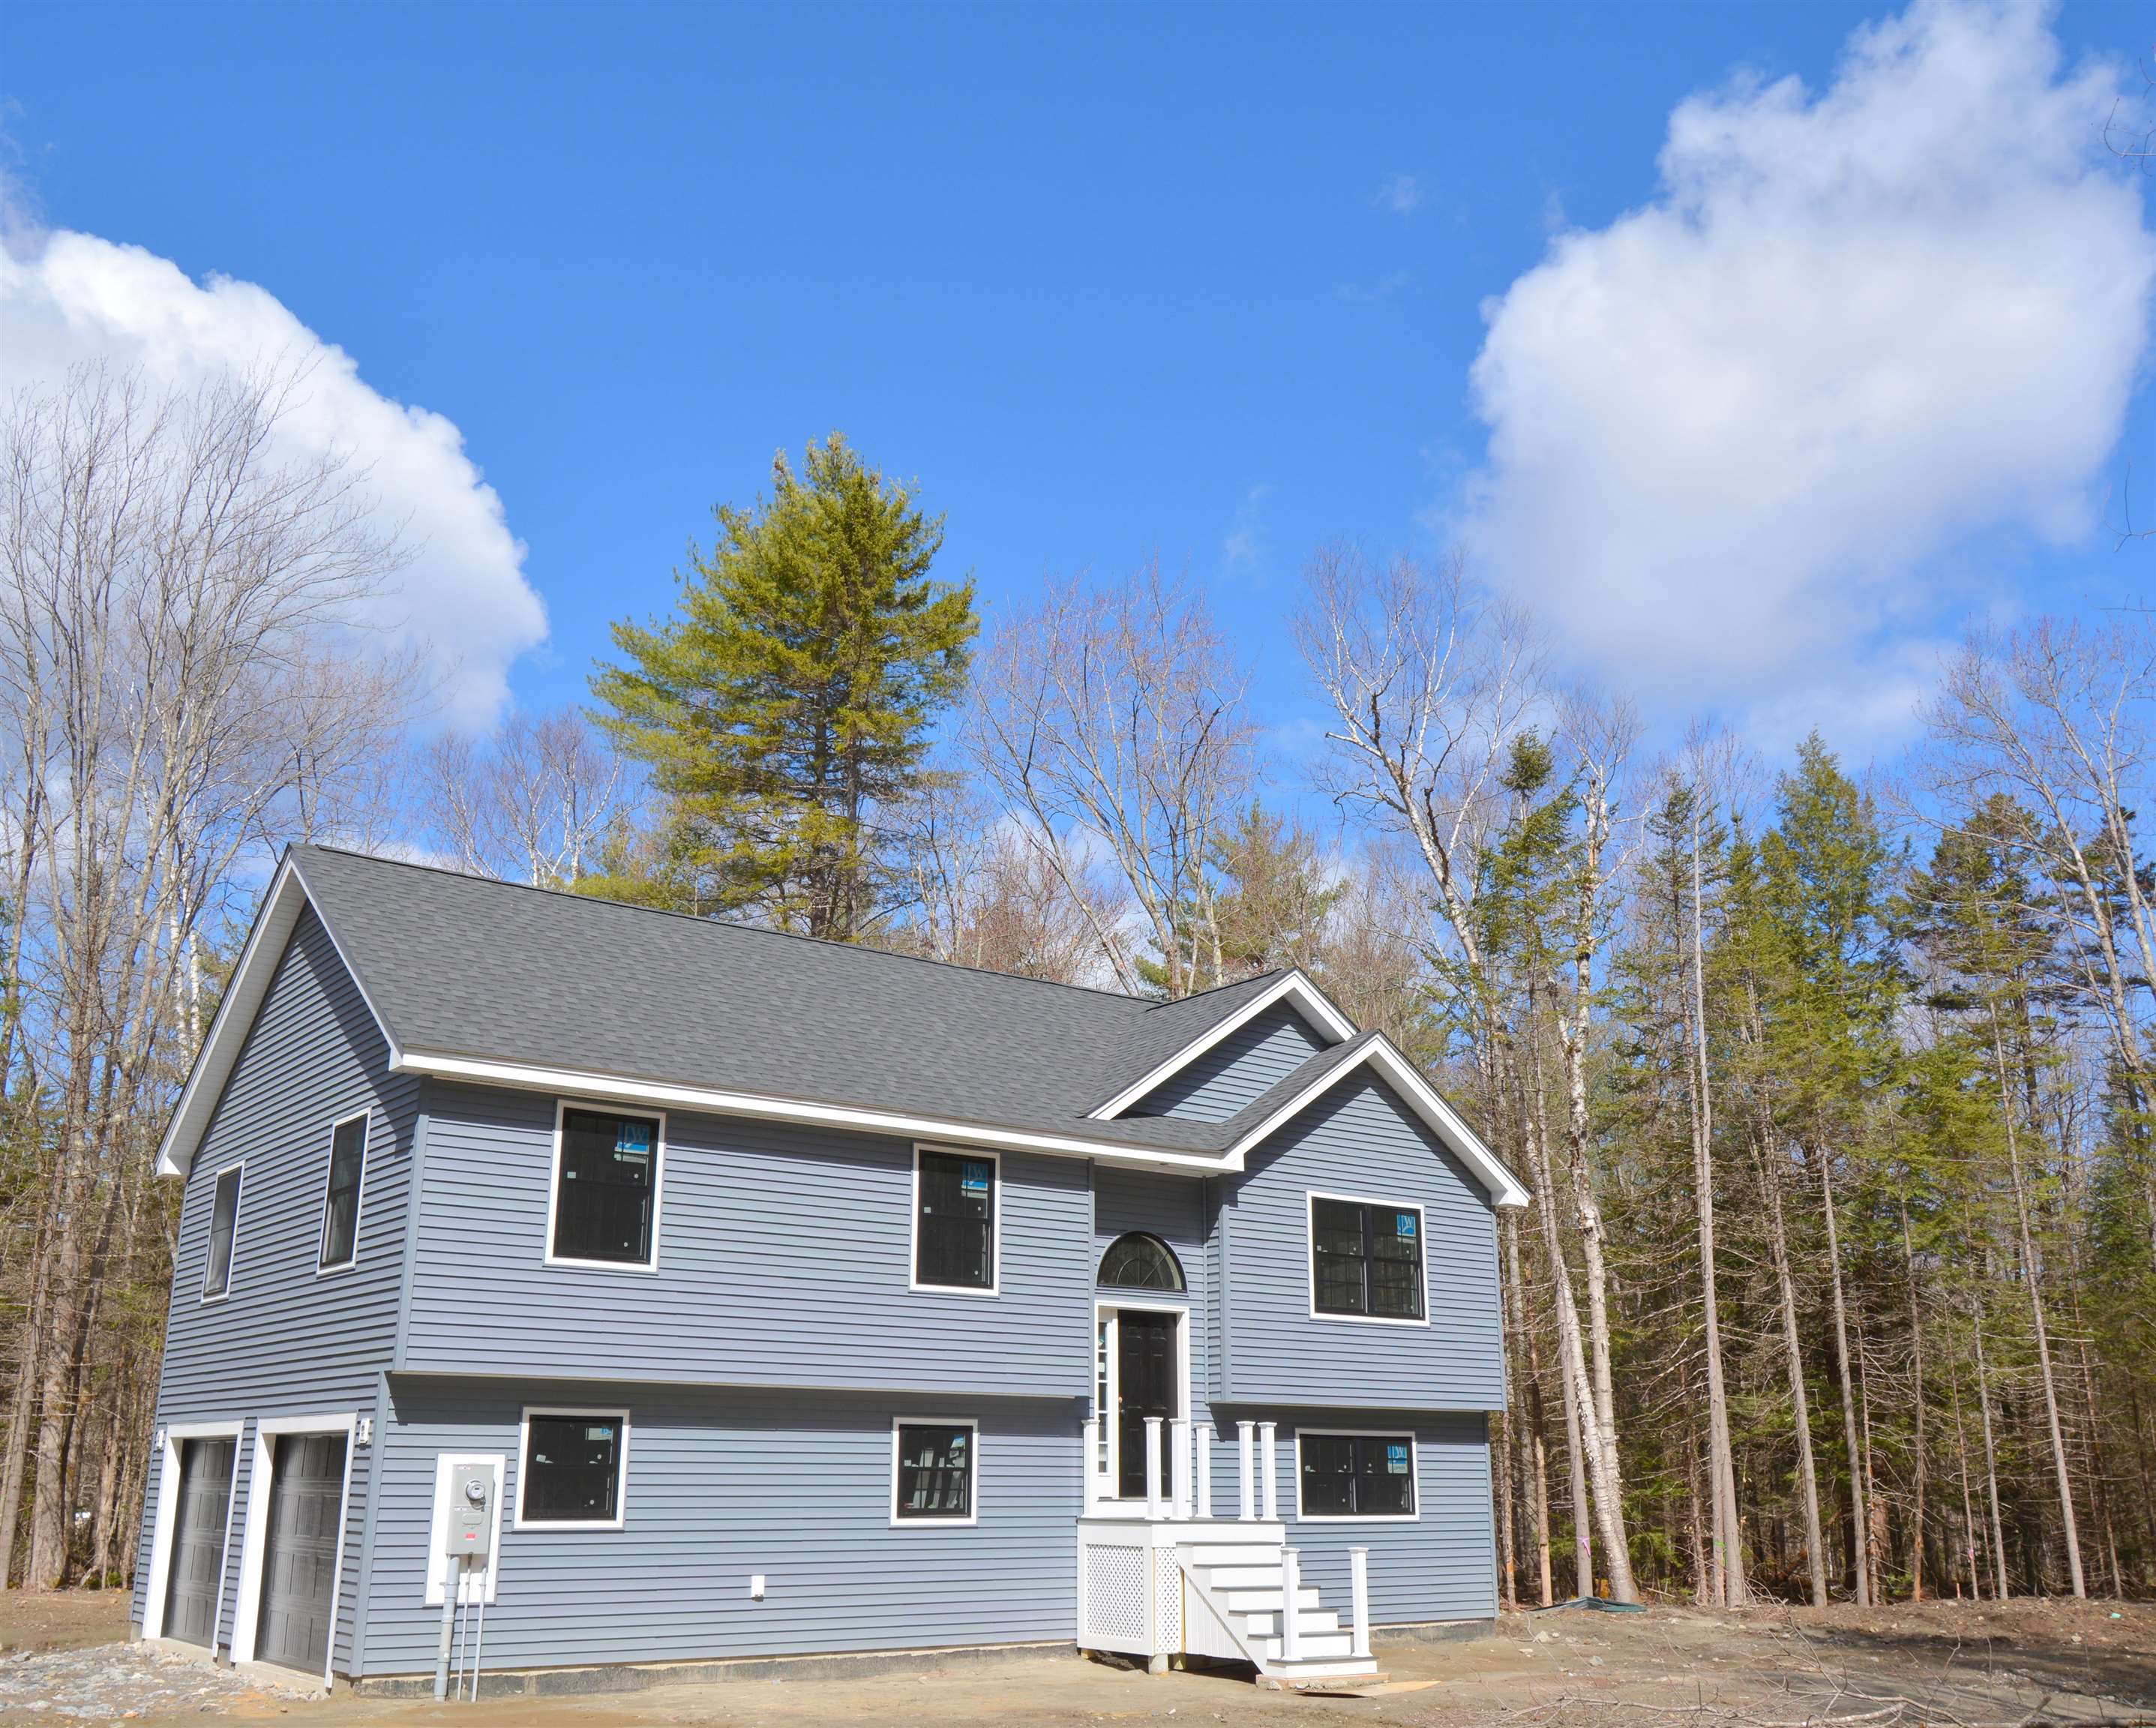 Village of Eastman in Town of Grantham NH Home for sale $$549,016 $469 per sq.ft.